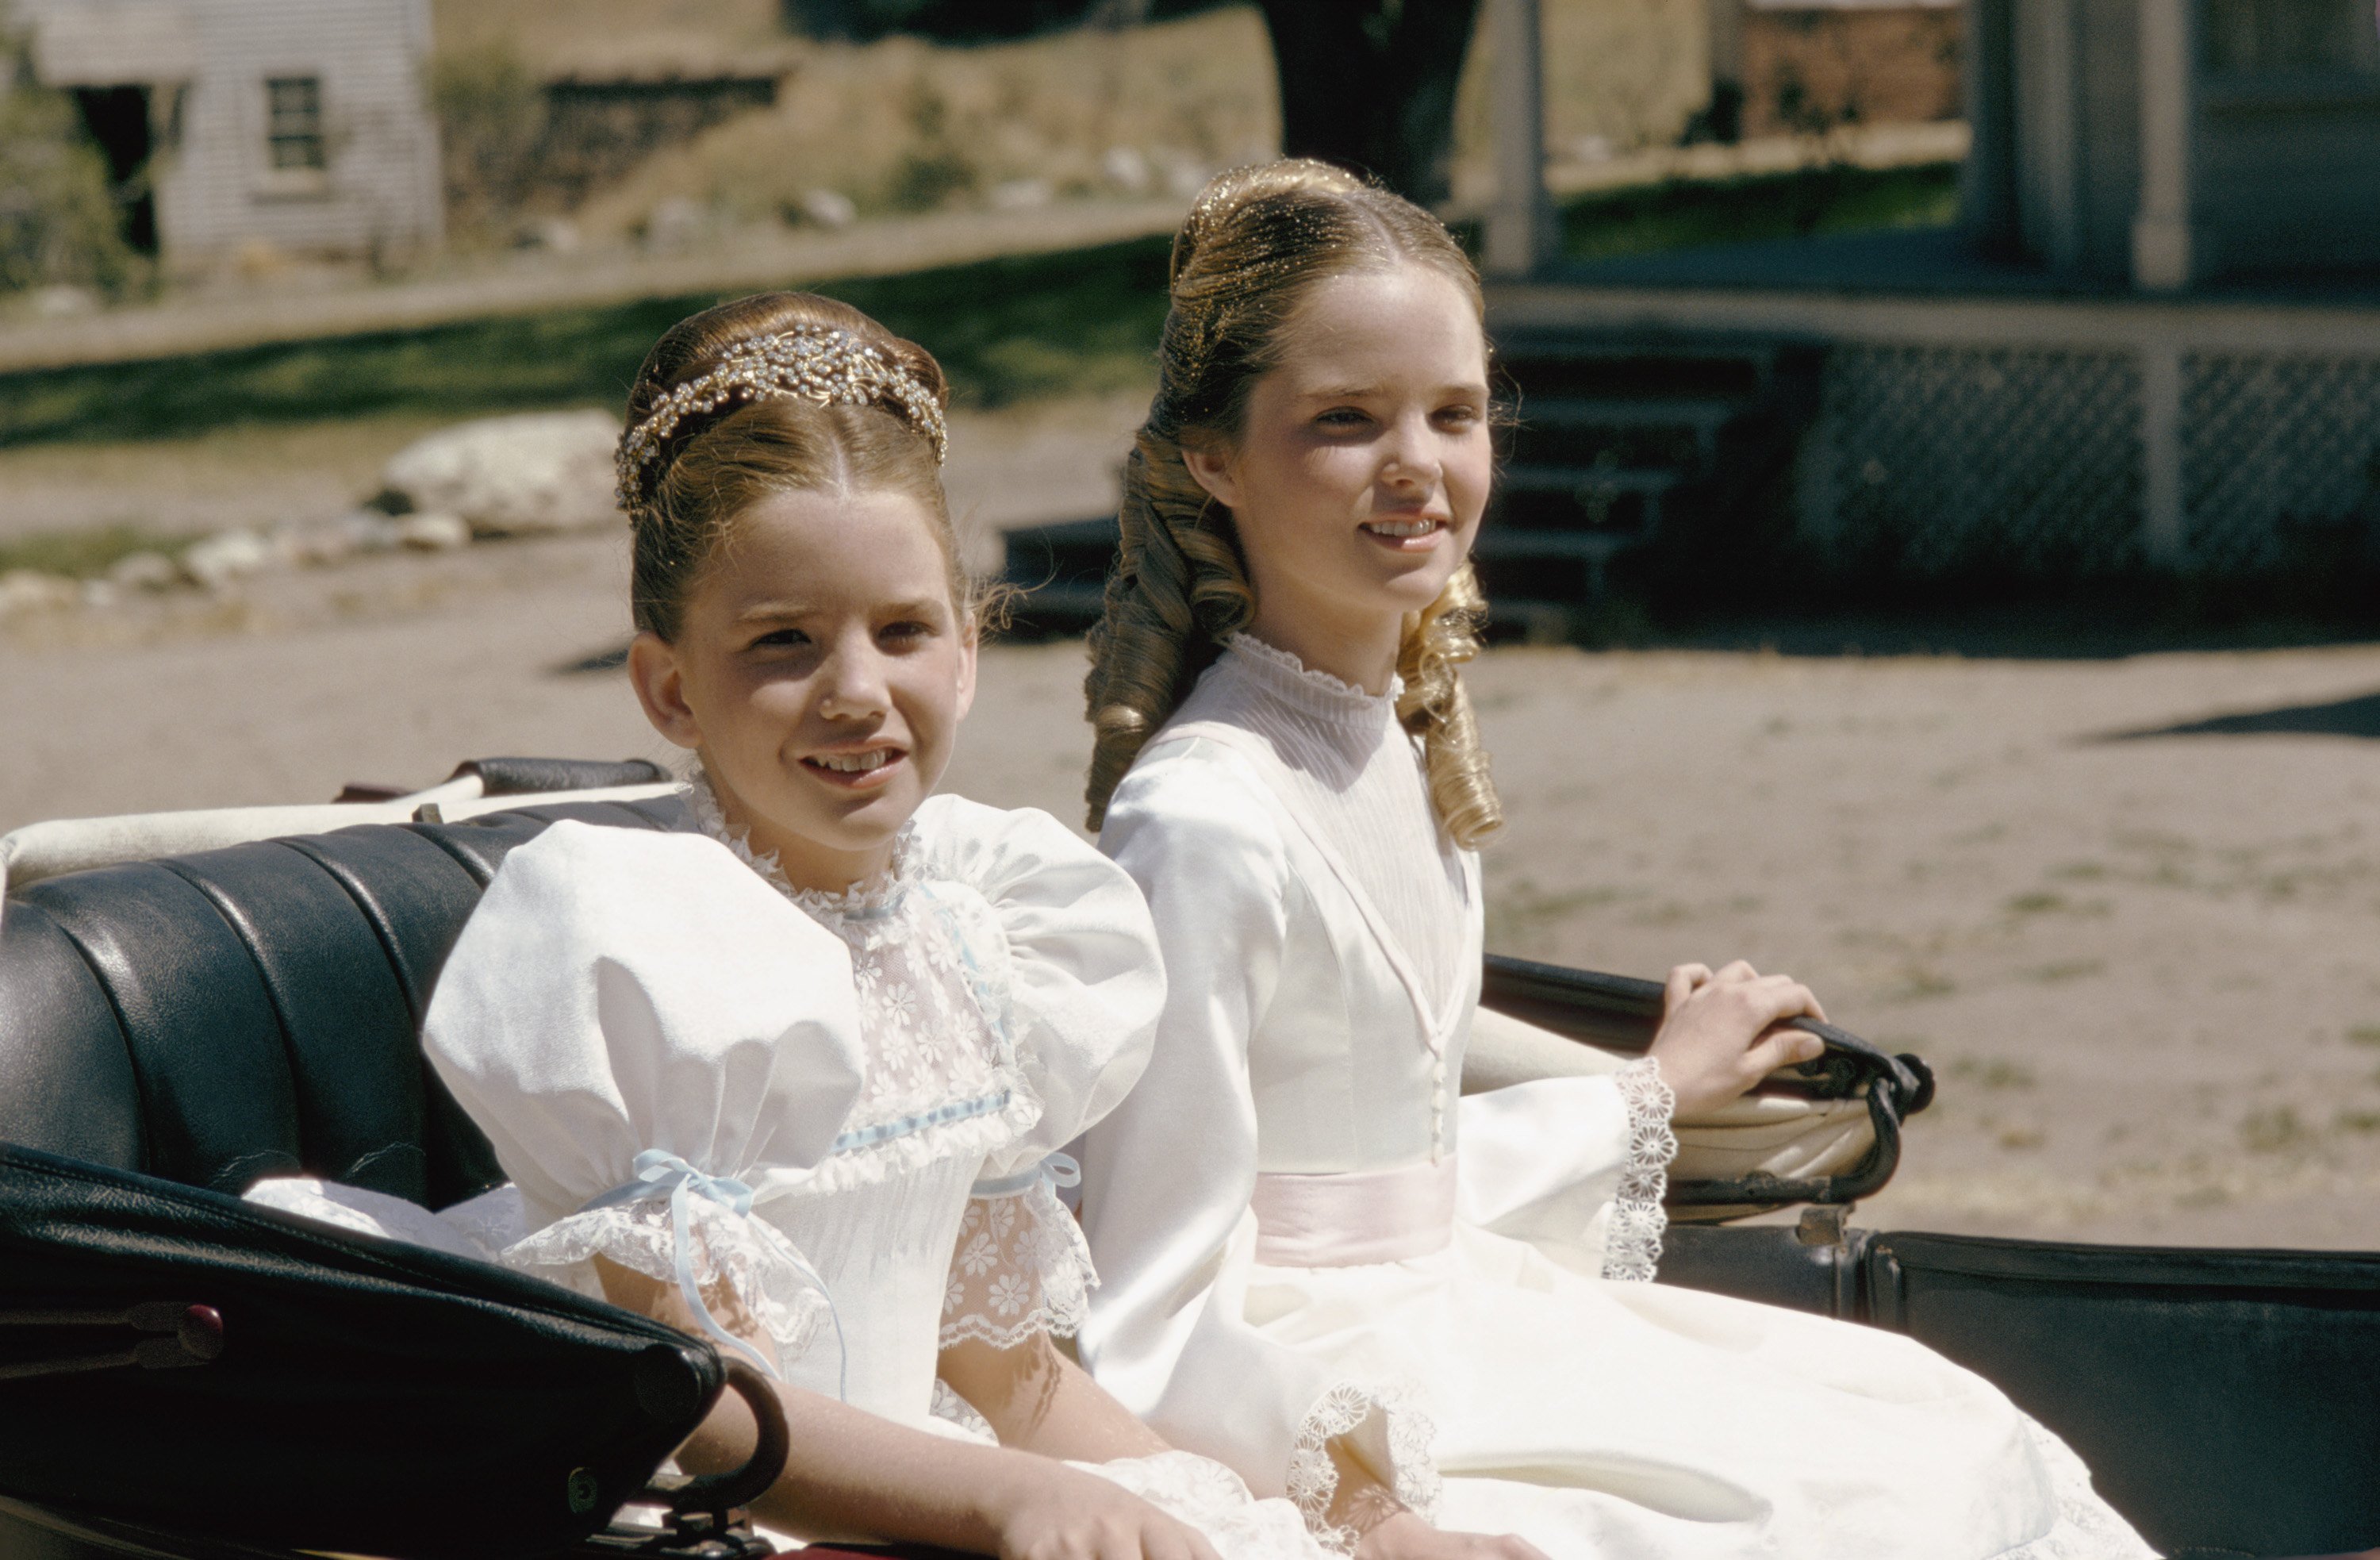 Melissa Gilbert as Laura Ingalls, and Melissa Sue Anderson as Mary Ingalls | NBCU Photo Bank